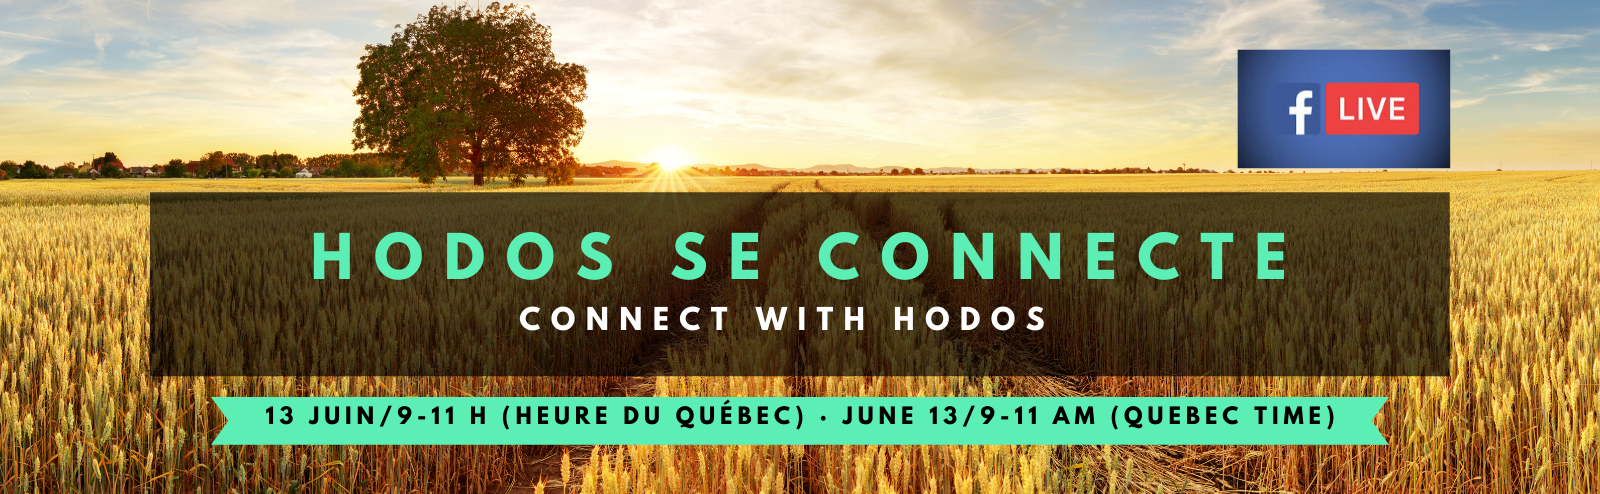 CONNECT WITH HODOS – JUNE 13